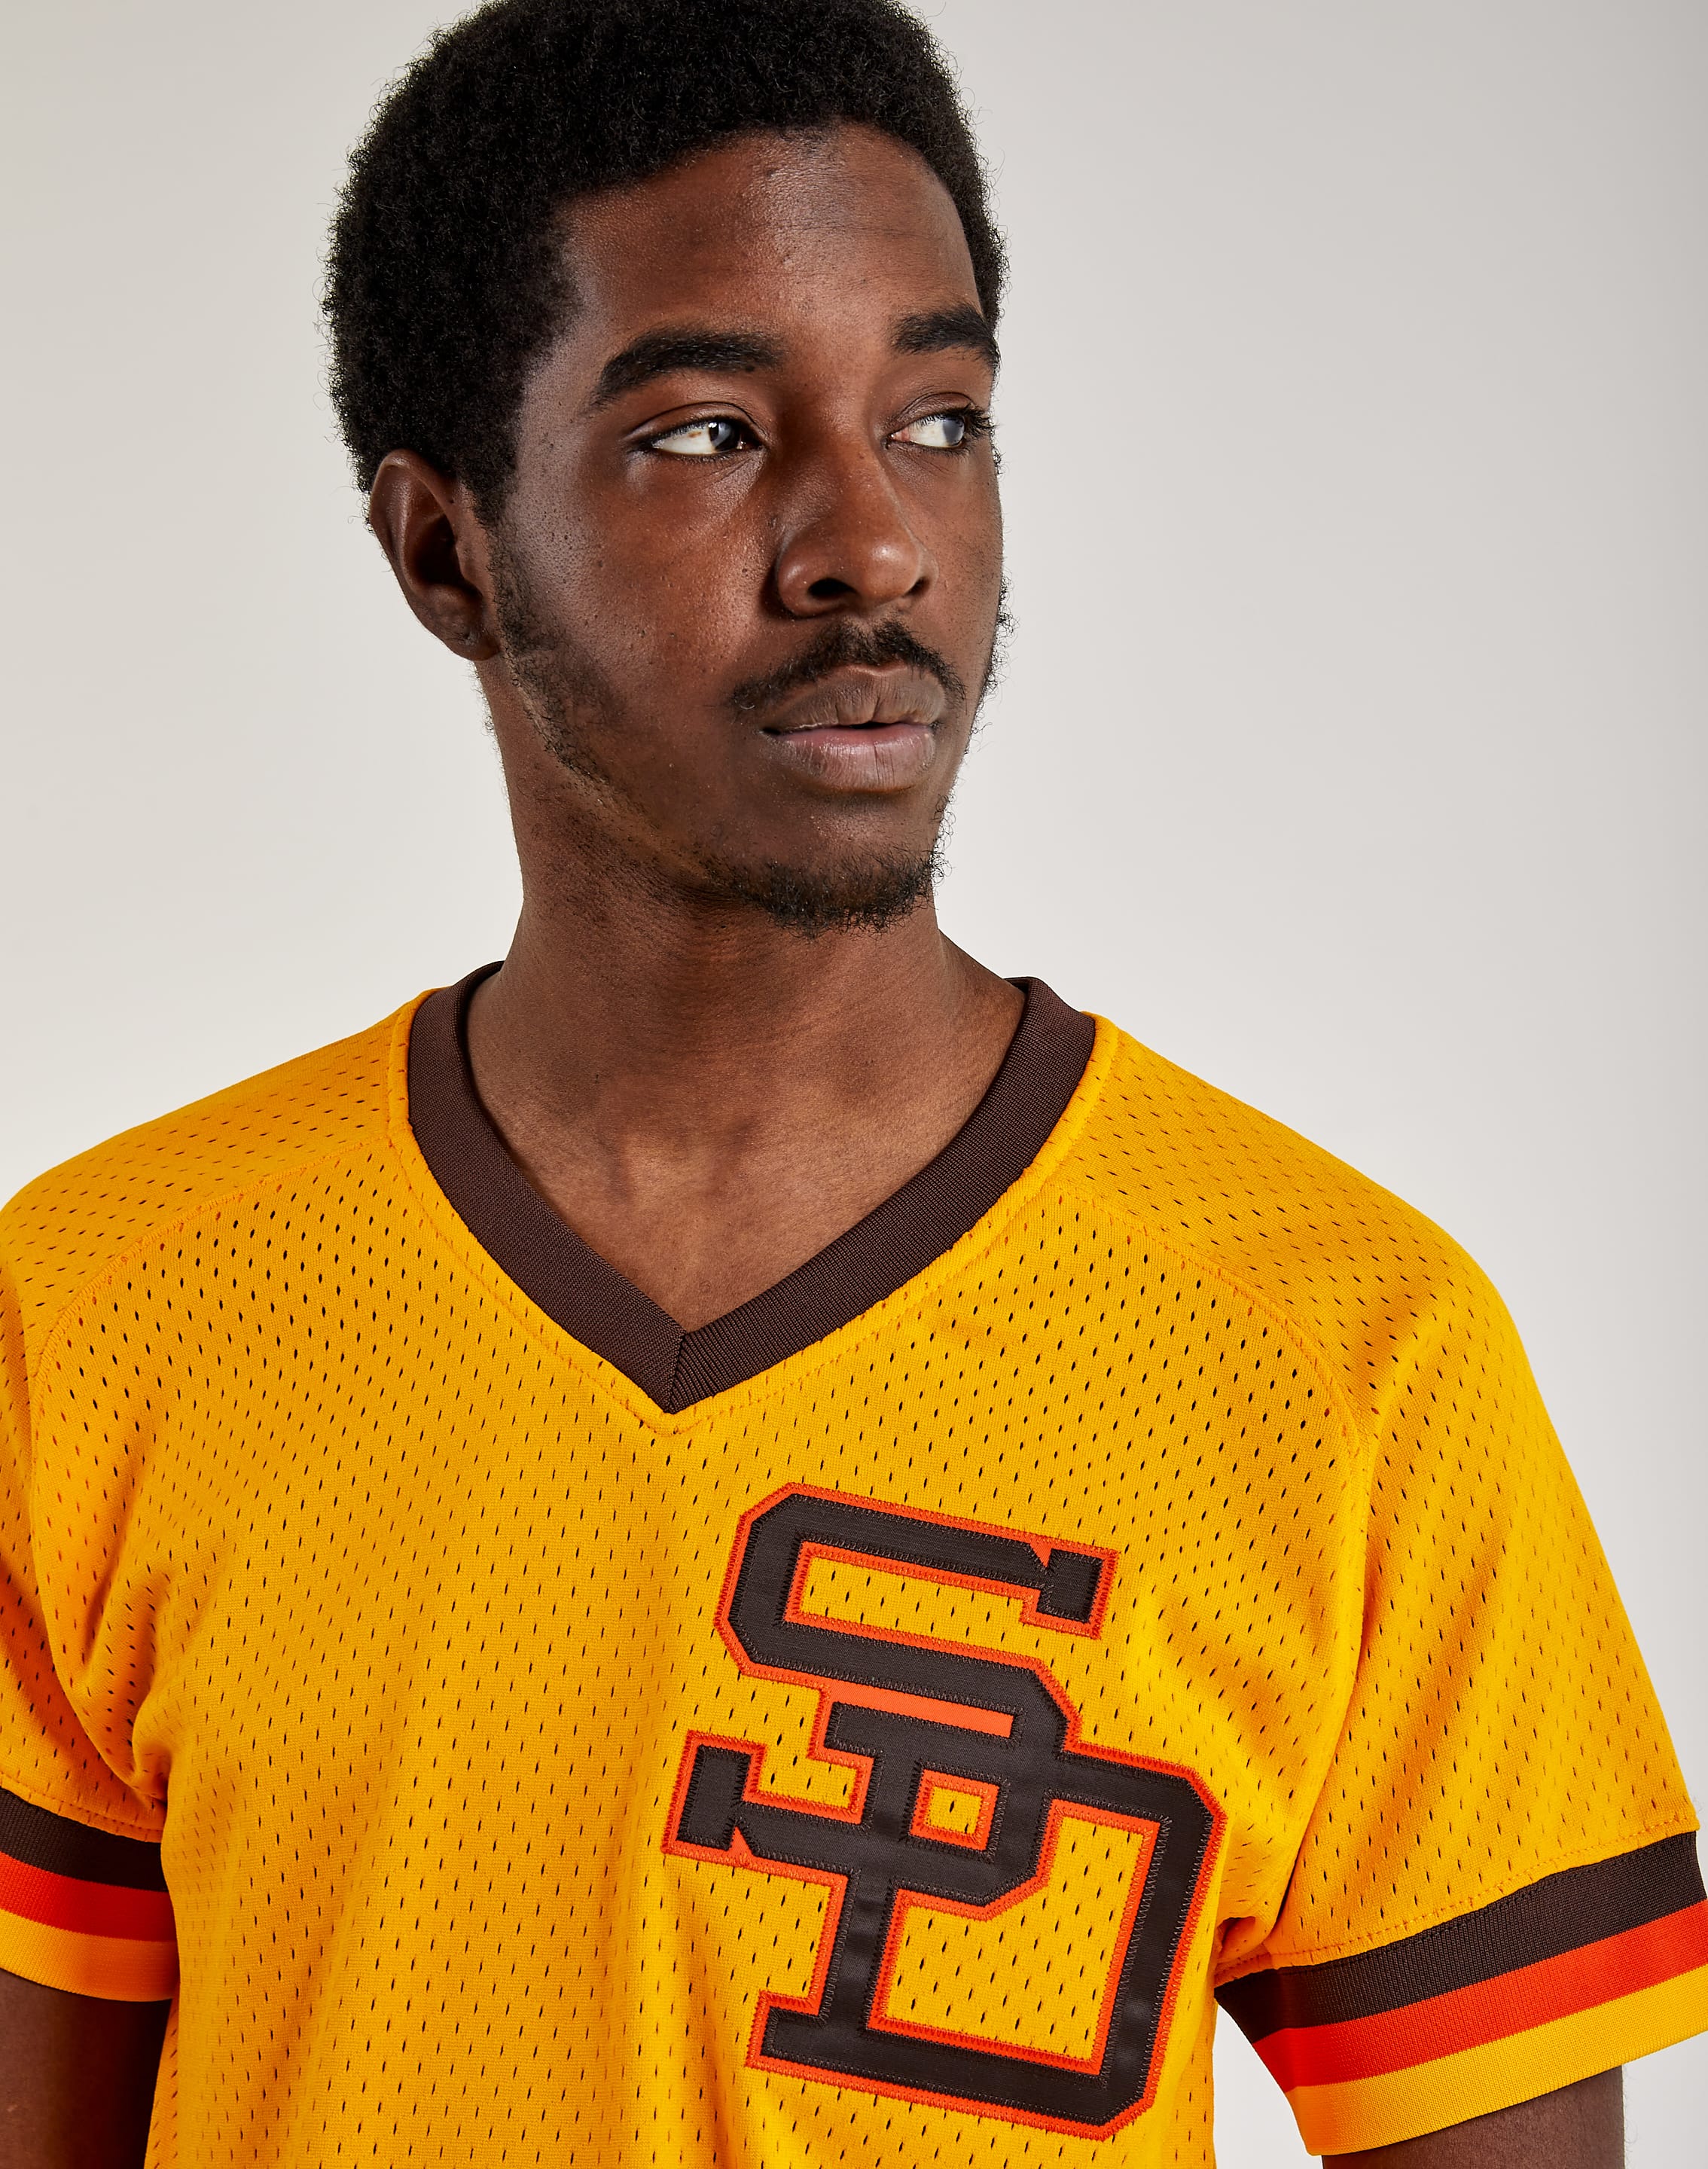 Mitchell & Ness Authentic Dave Winfield San Diego Padres 1980 Jersey – DTLR